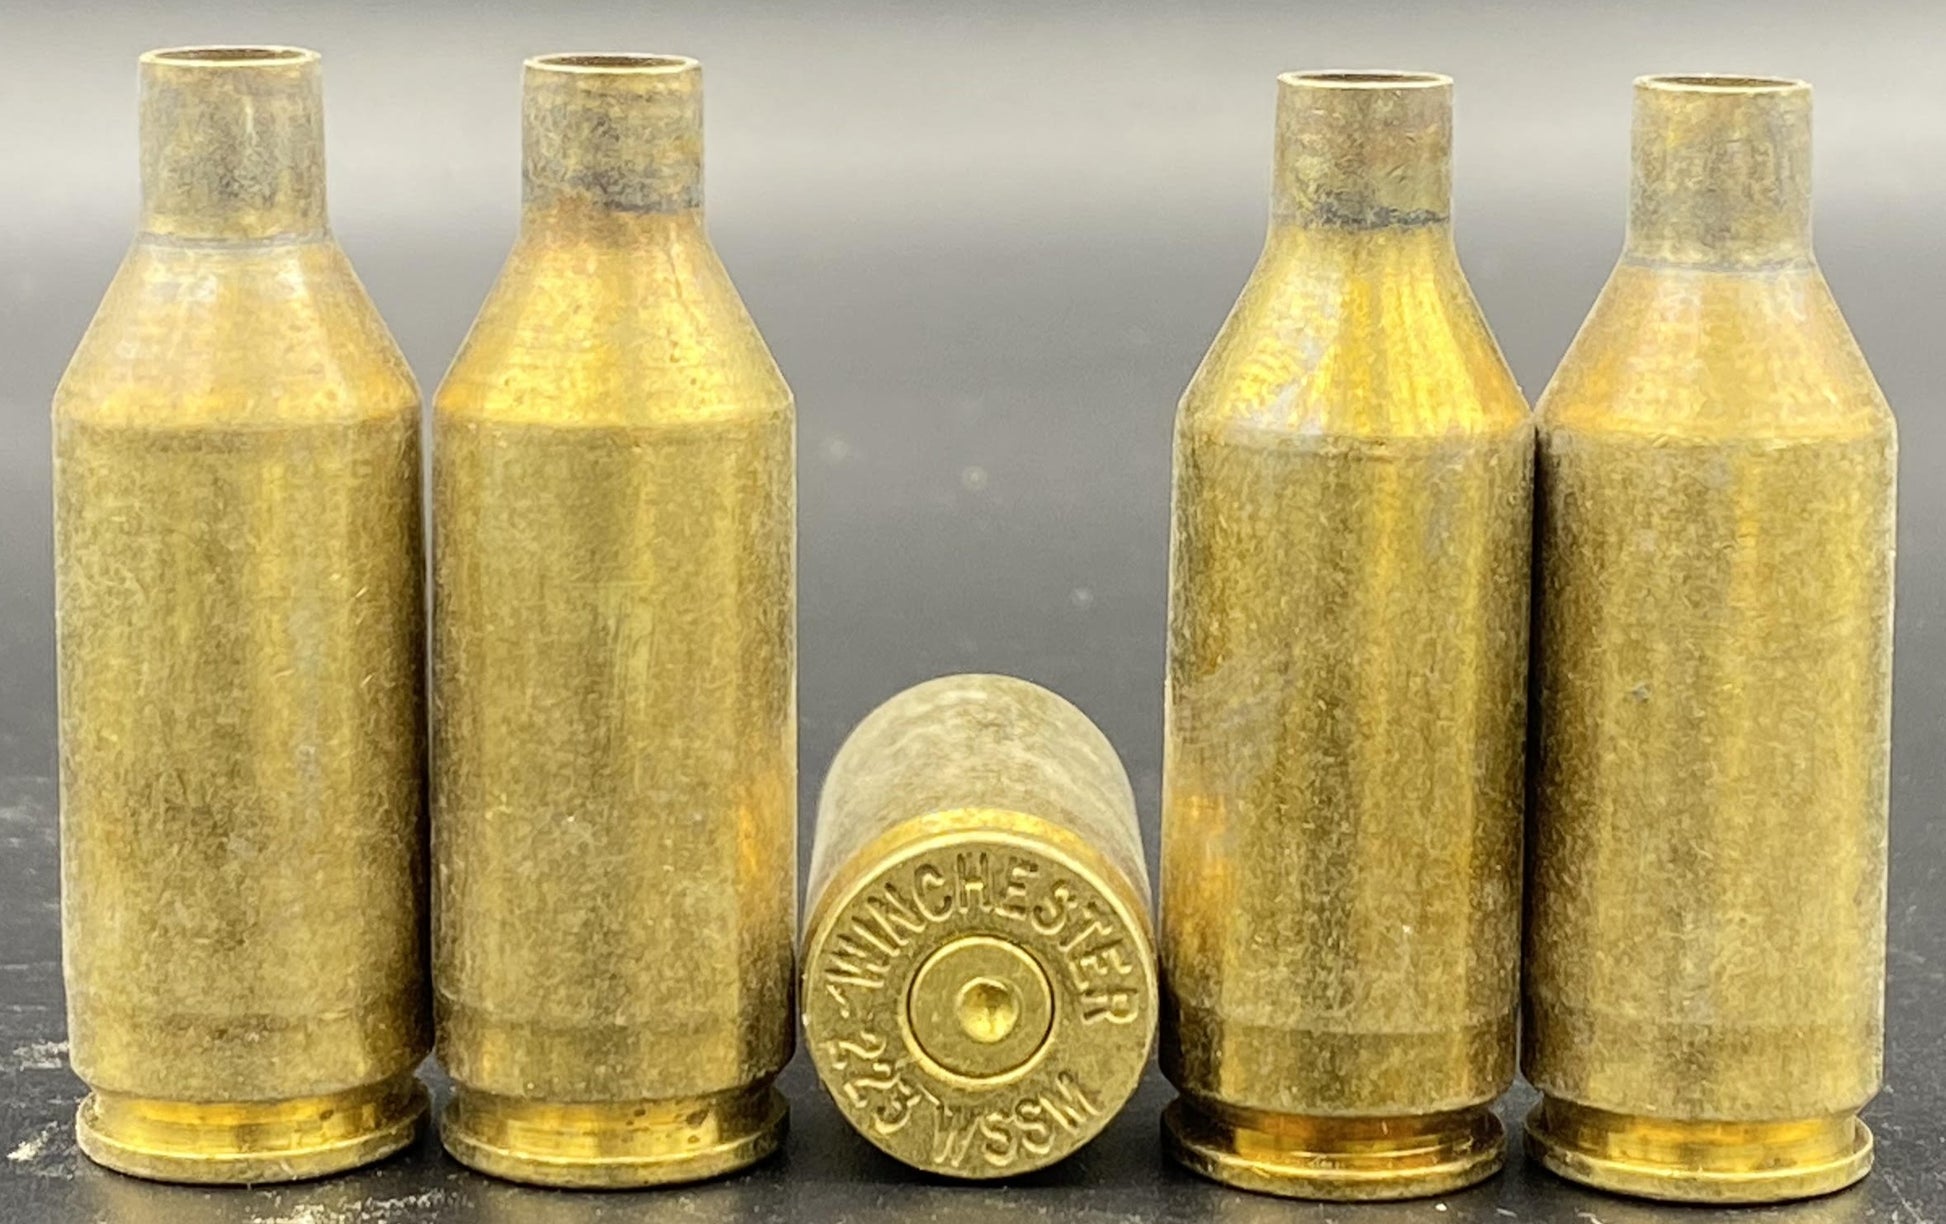 223 WSSM once fired rifle brass. Hand sorted from reputable indoor/military ranges for reloading. Reliable spent casings for precision shooting.